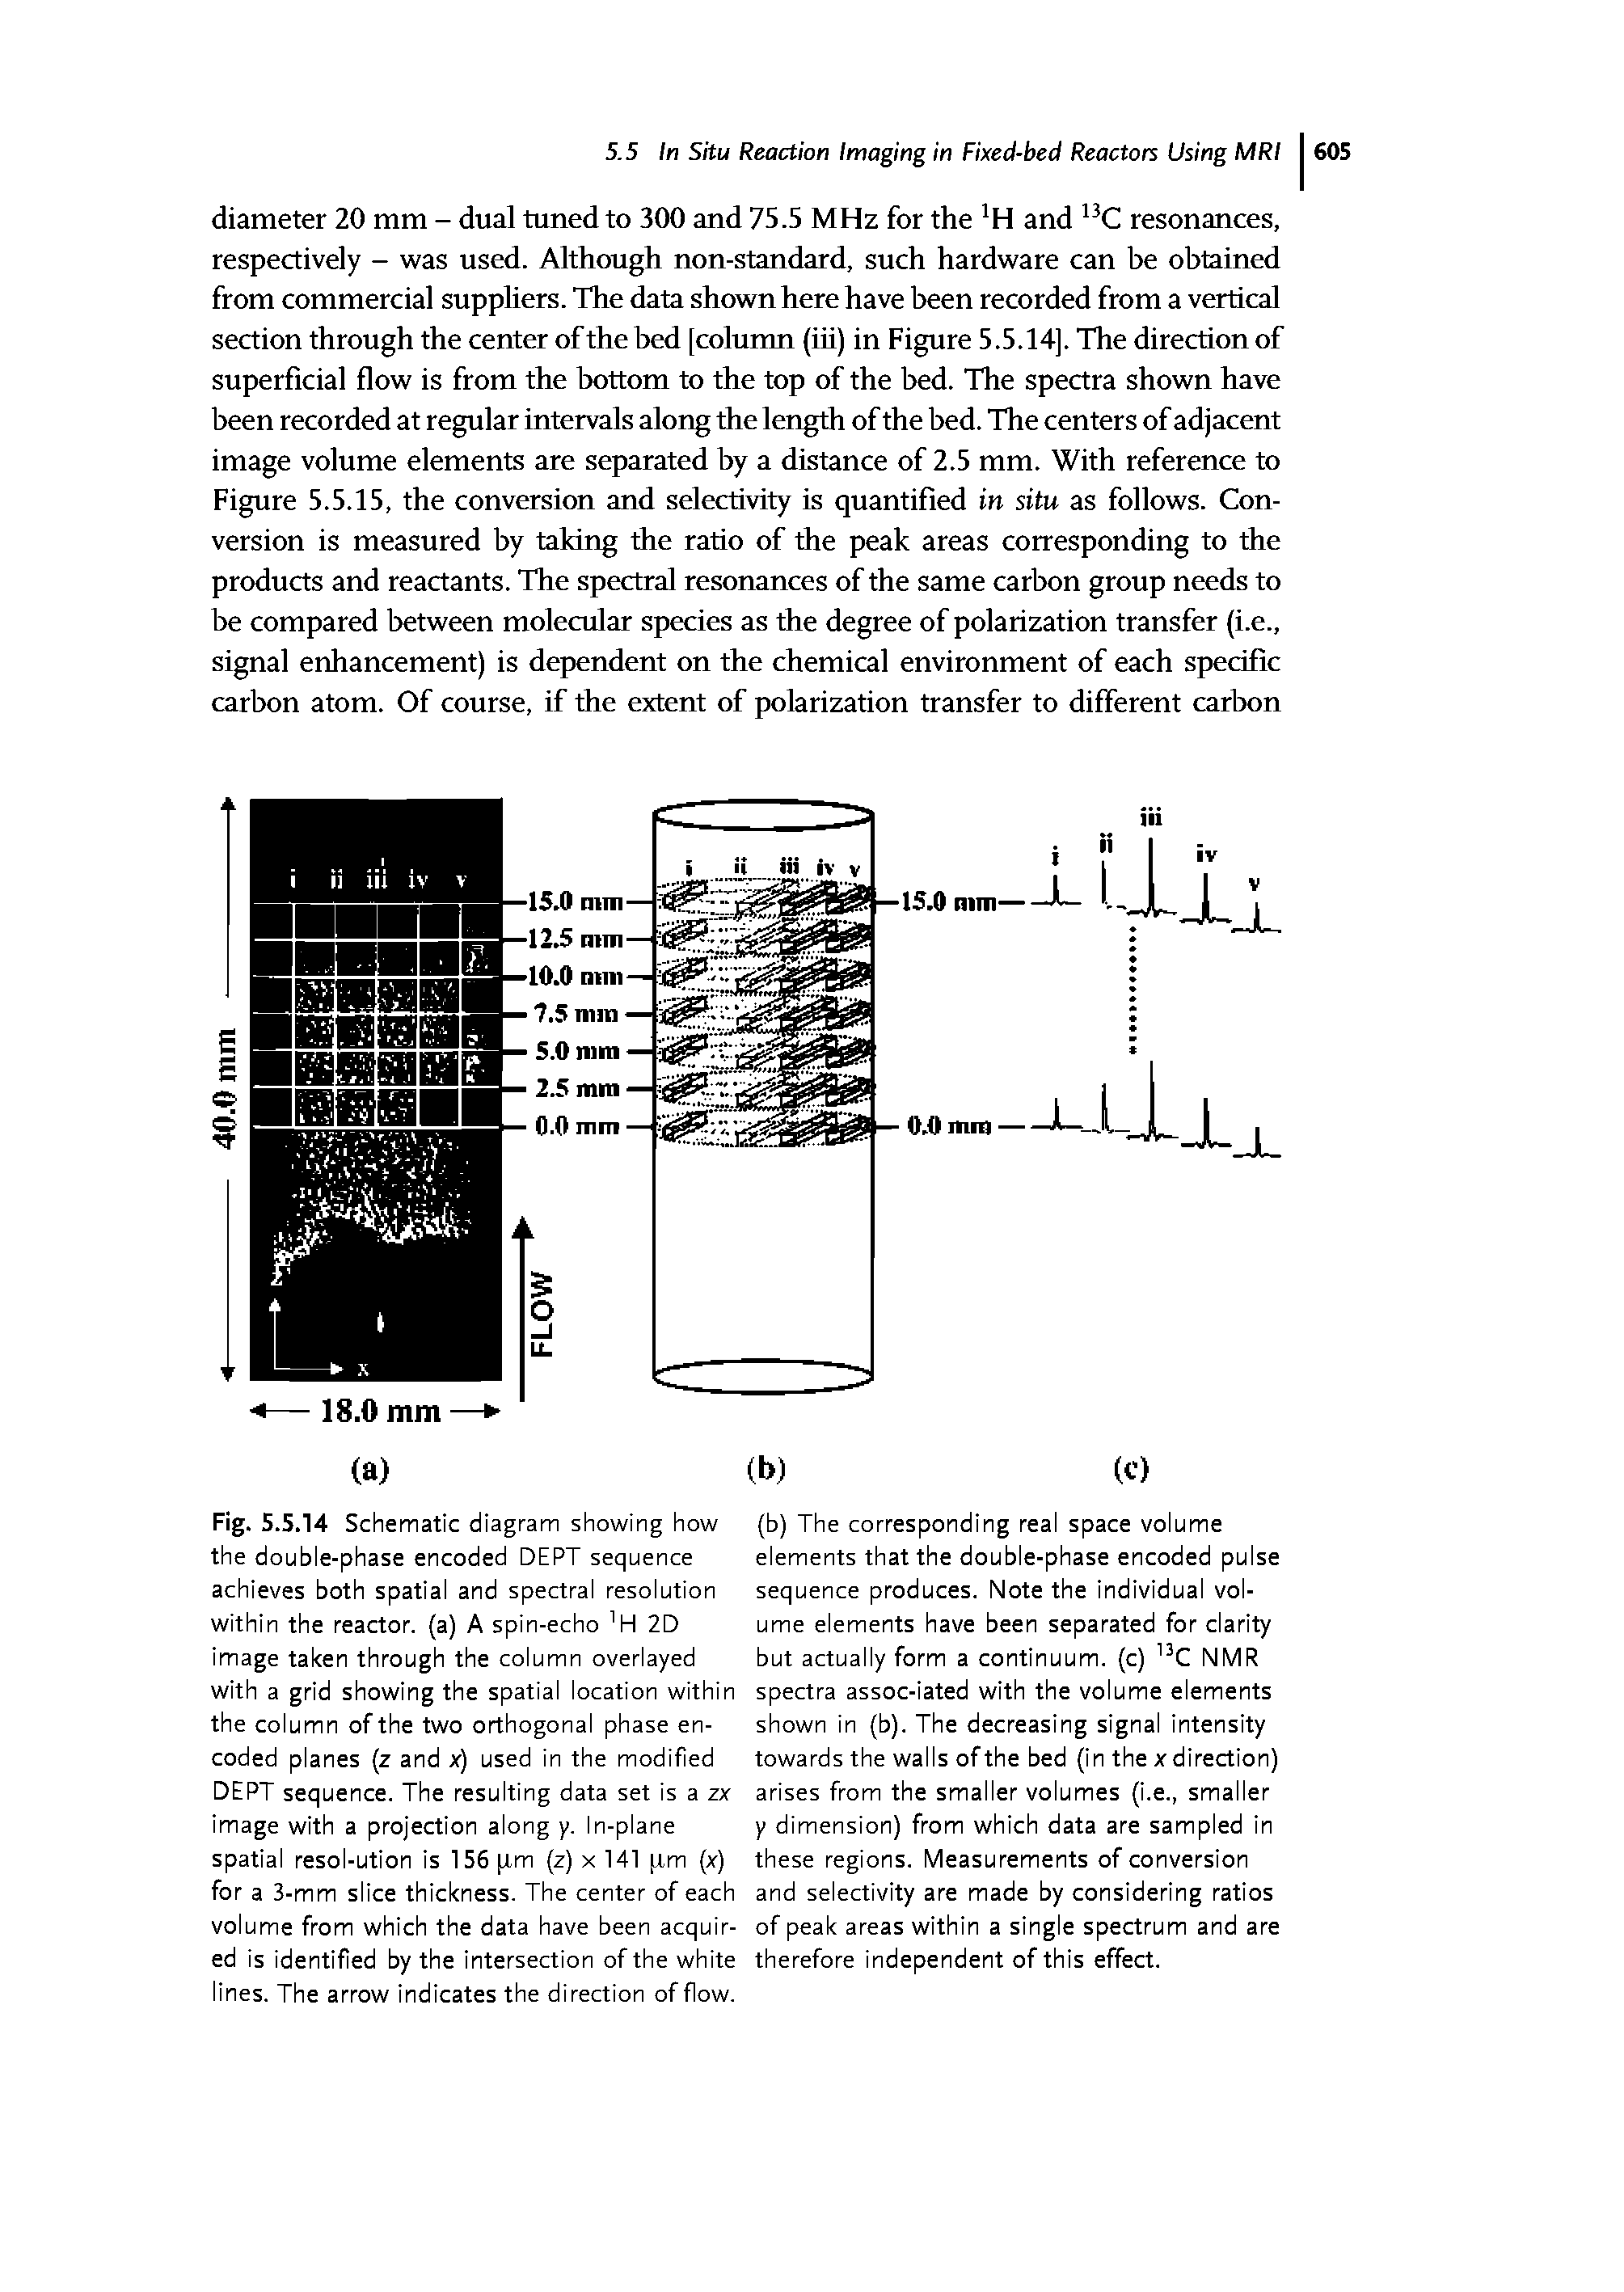 Fig. 5.5.14 Schematic diagram showing how the double-phase encoded DEPT sequence achieves both spatial and spectral resolution within the reactor, (a) A spin-echo ]H 2D image taken through the column overlayed with a grid showing the spatial location within the column of the two orthogonal phase encoded planes (z and x) used in the modified DEPT sequence. The resulting data set is a zx image with a projection along y. In-plane spatial resol-ution is 156 [Am (z) x 141 [xm (x) for a 3-mm slice thickness. The center of each volume from which the data have been acquired is identified by the intersection of the white lines. The arrow indicates the direction of flow.